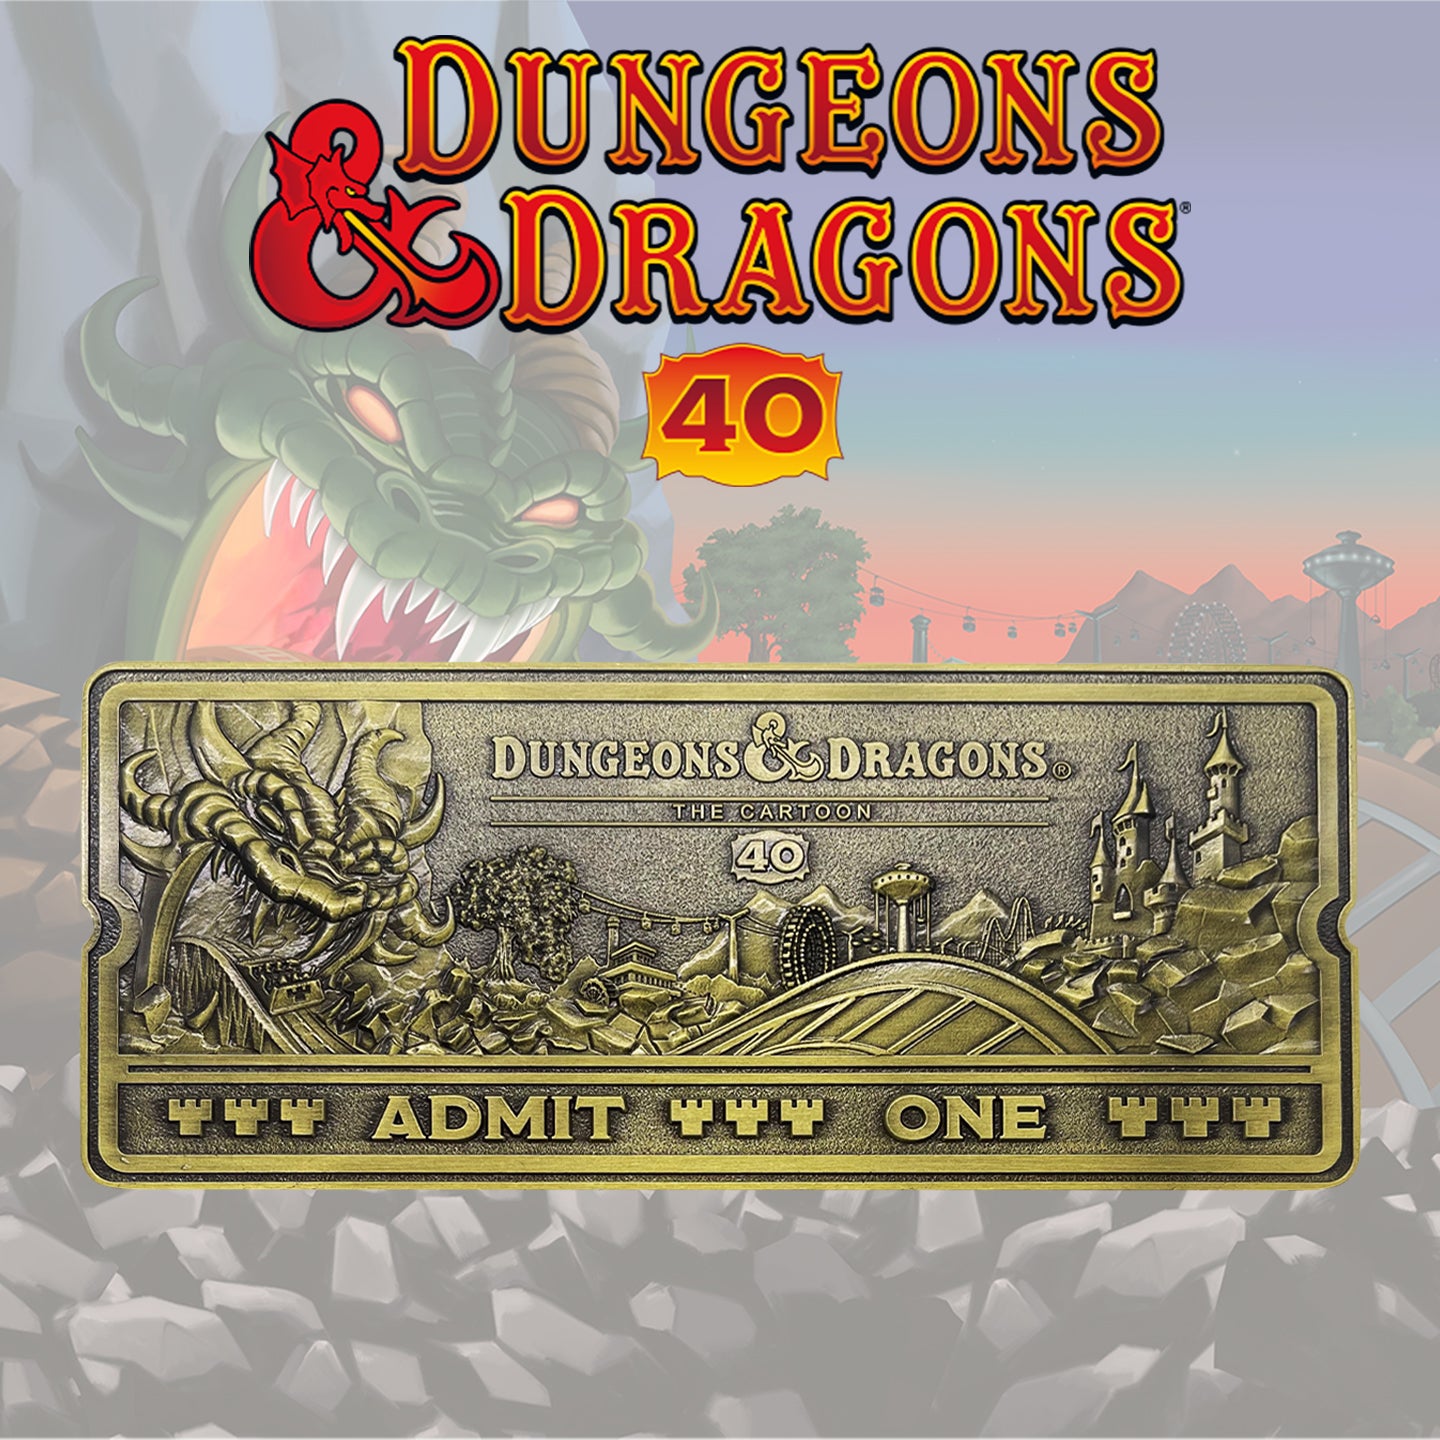 Dungeons & Dragons: The Cartoon 40th Anniversary Rollercoaster Ticket